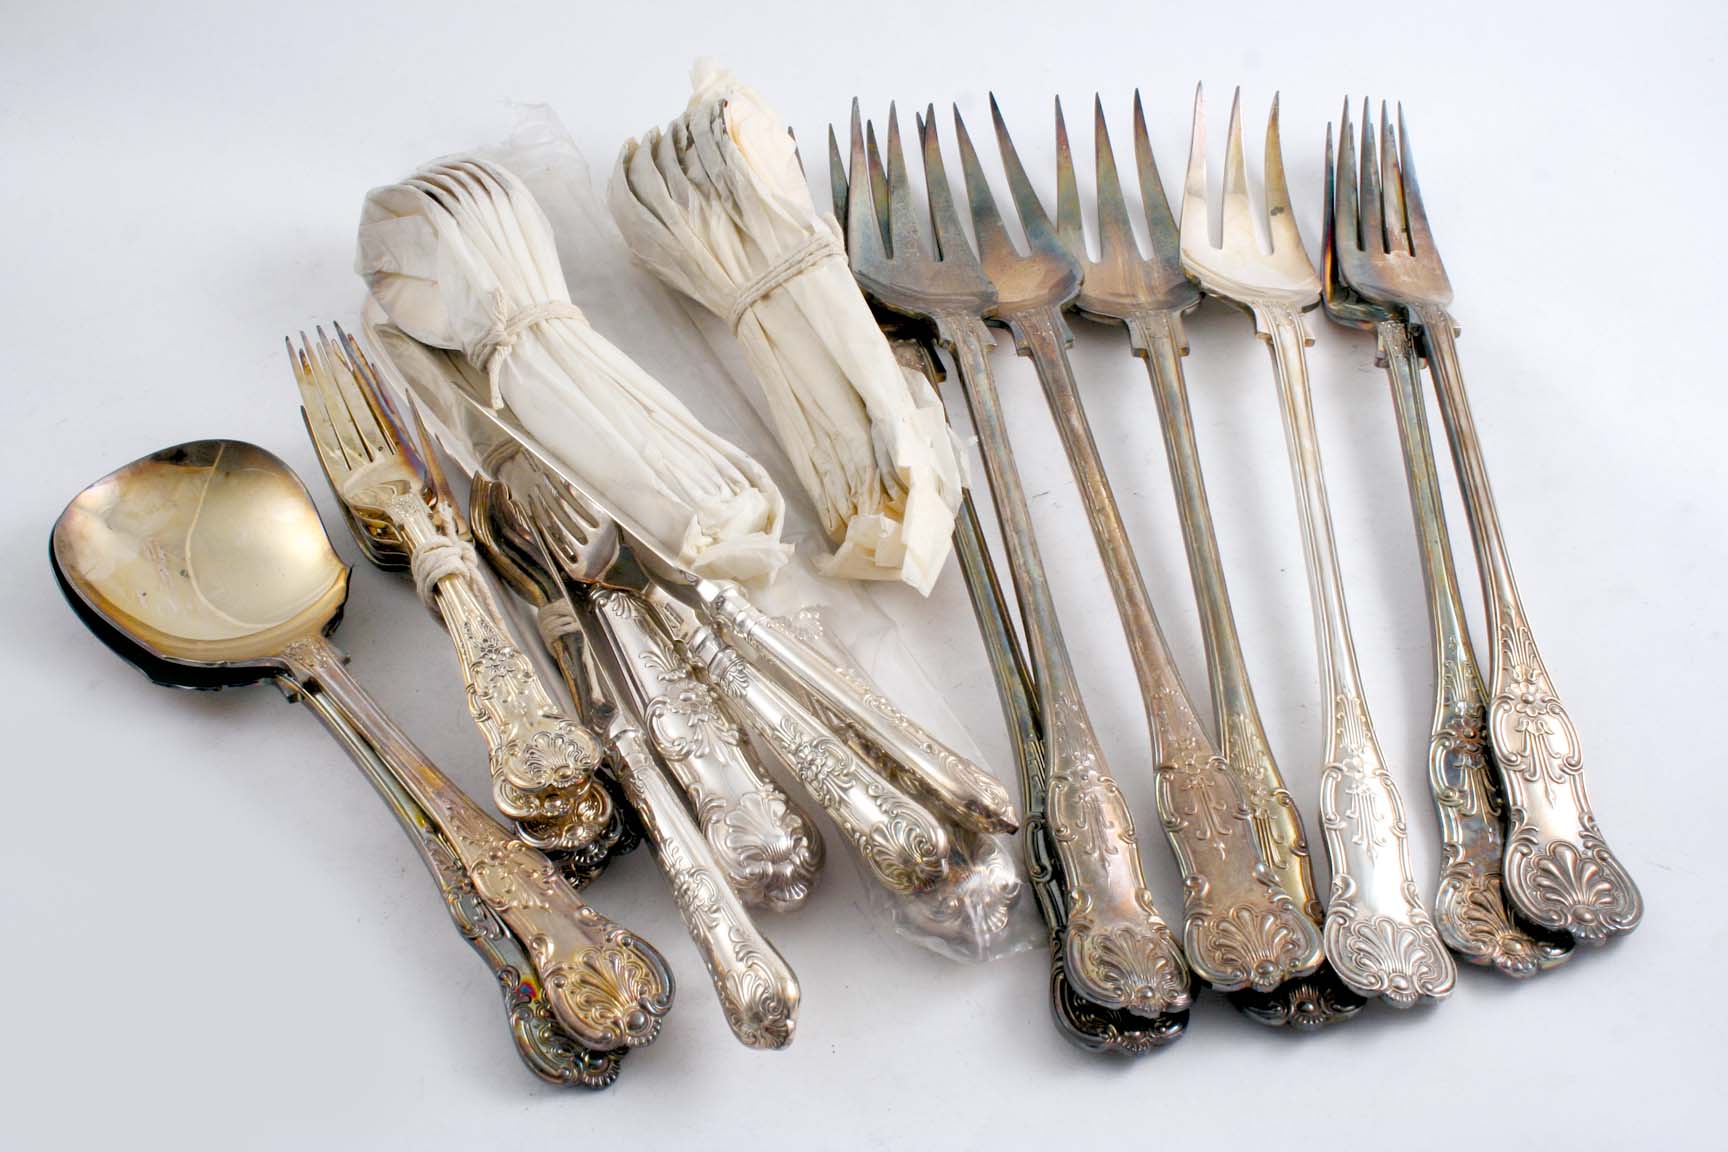 A QUANTITY OF MODERN ELECTROPLATED QUEEN`S PATTERN FLATWARE & CUTLERY including seven very large